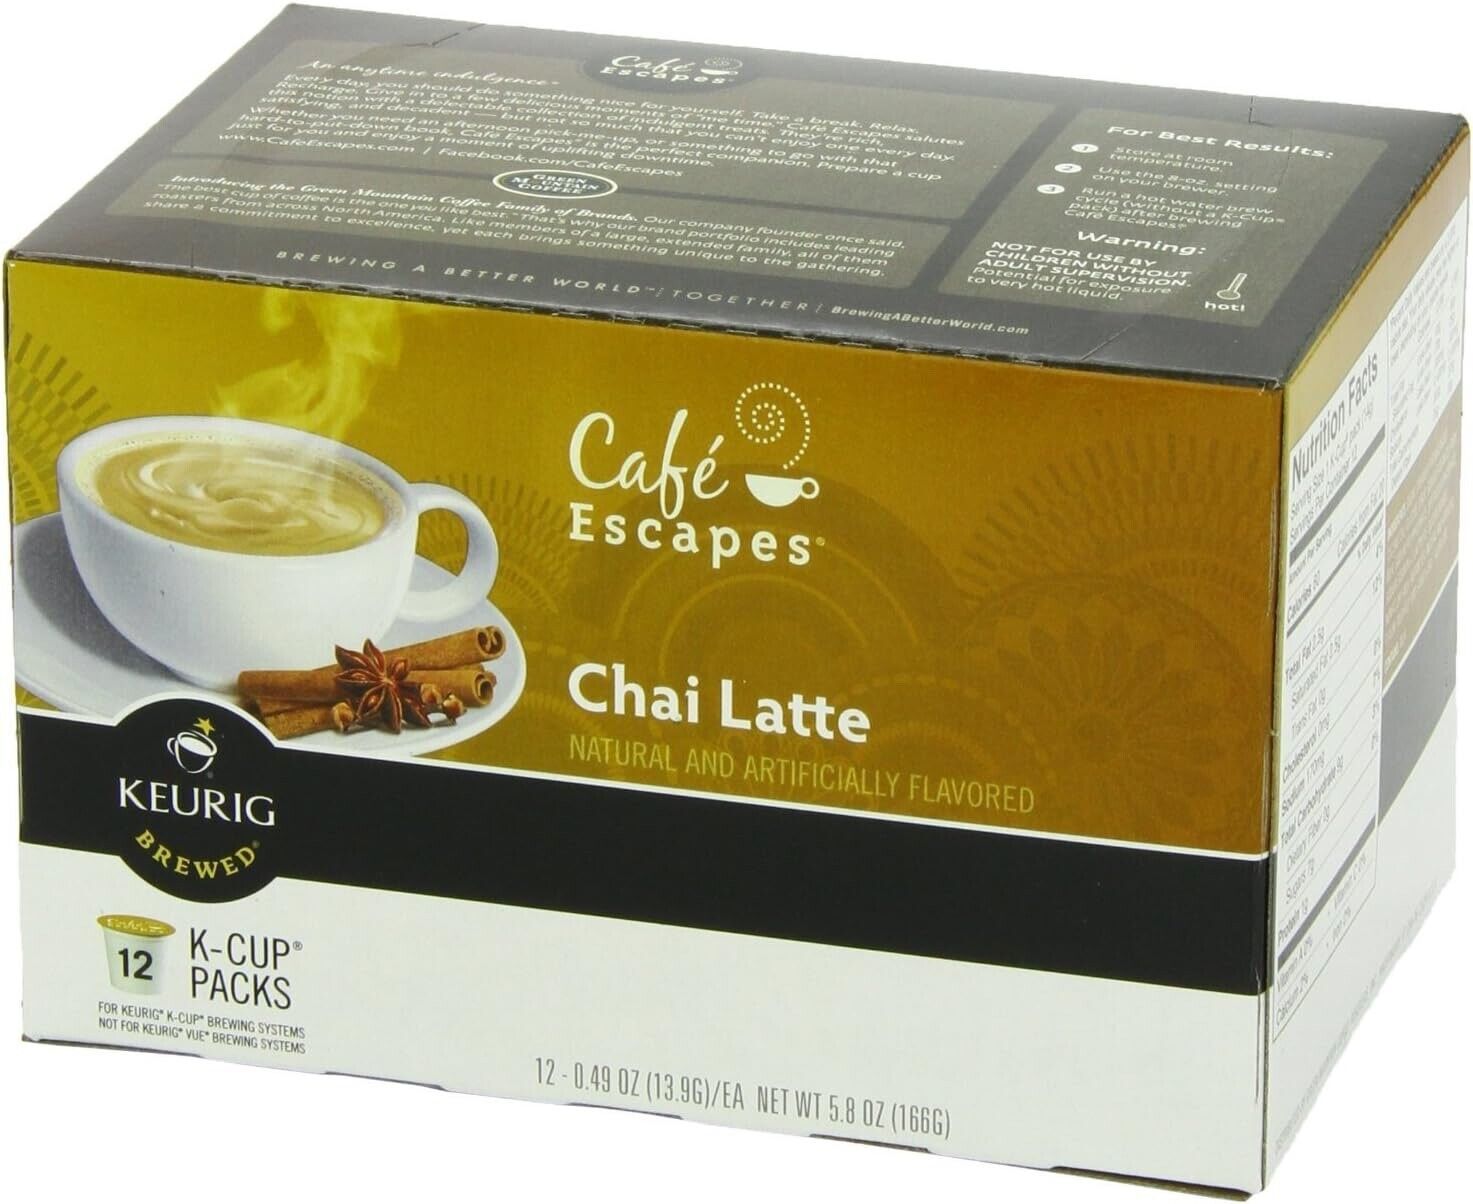 Primary image for (72 ct) Cafe Escapes Chai Latte Keurig Coffee K-cups (6 boxes x 12 ct)  BB 1/24